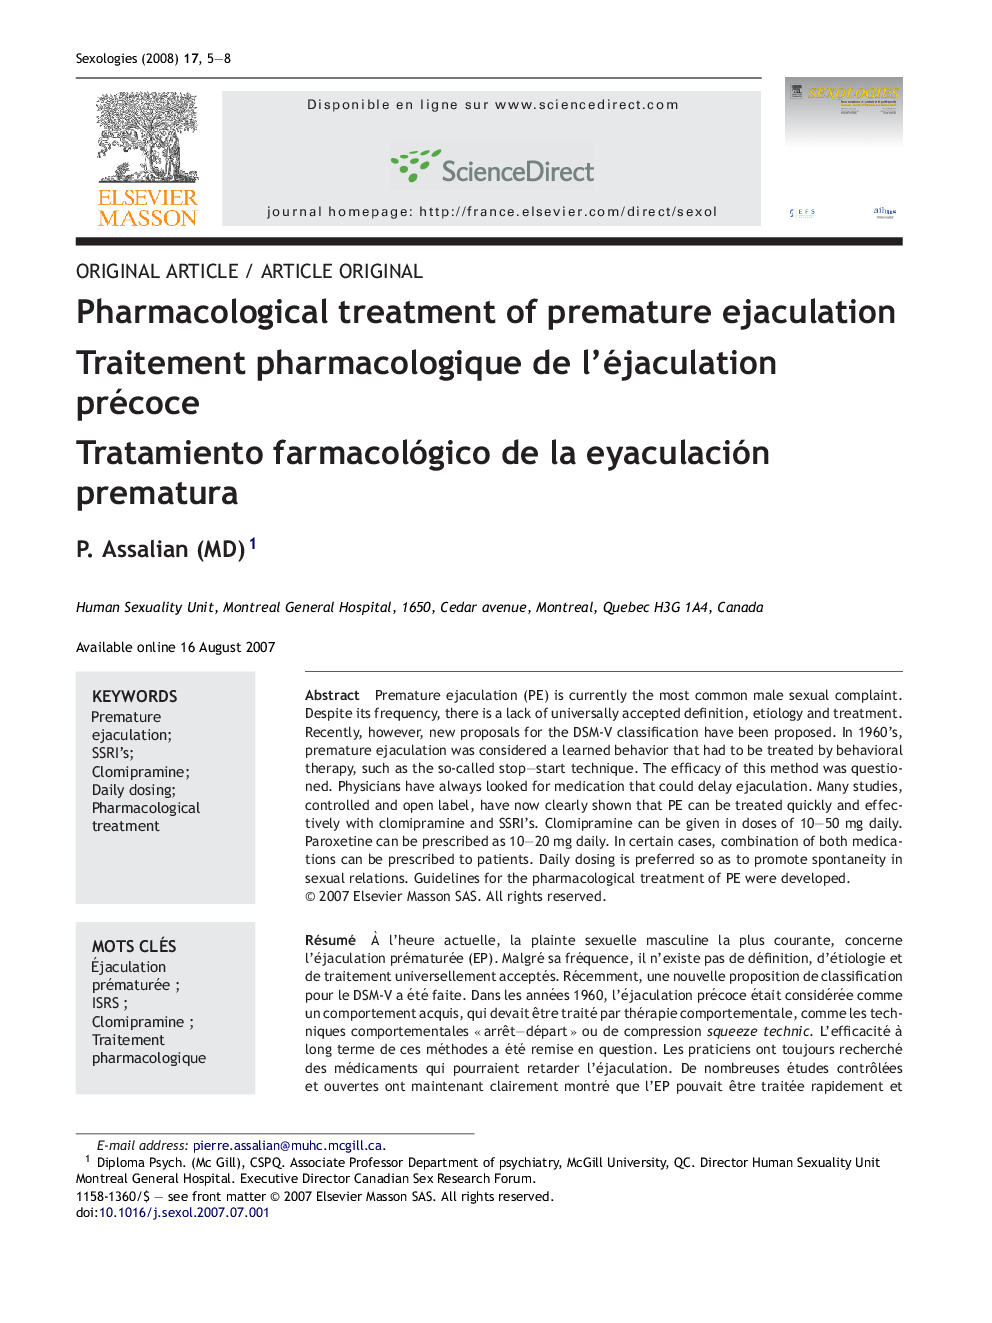 Pharmacological treatment of premature ejaculation